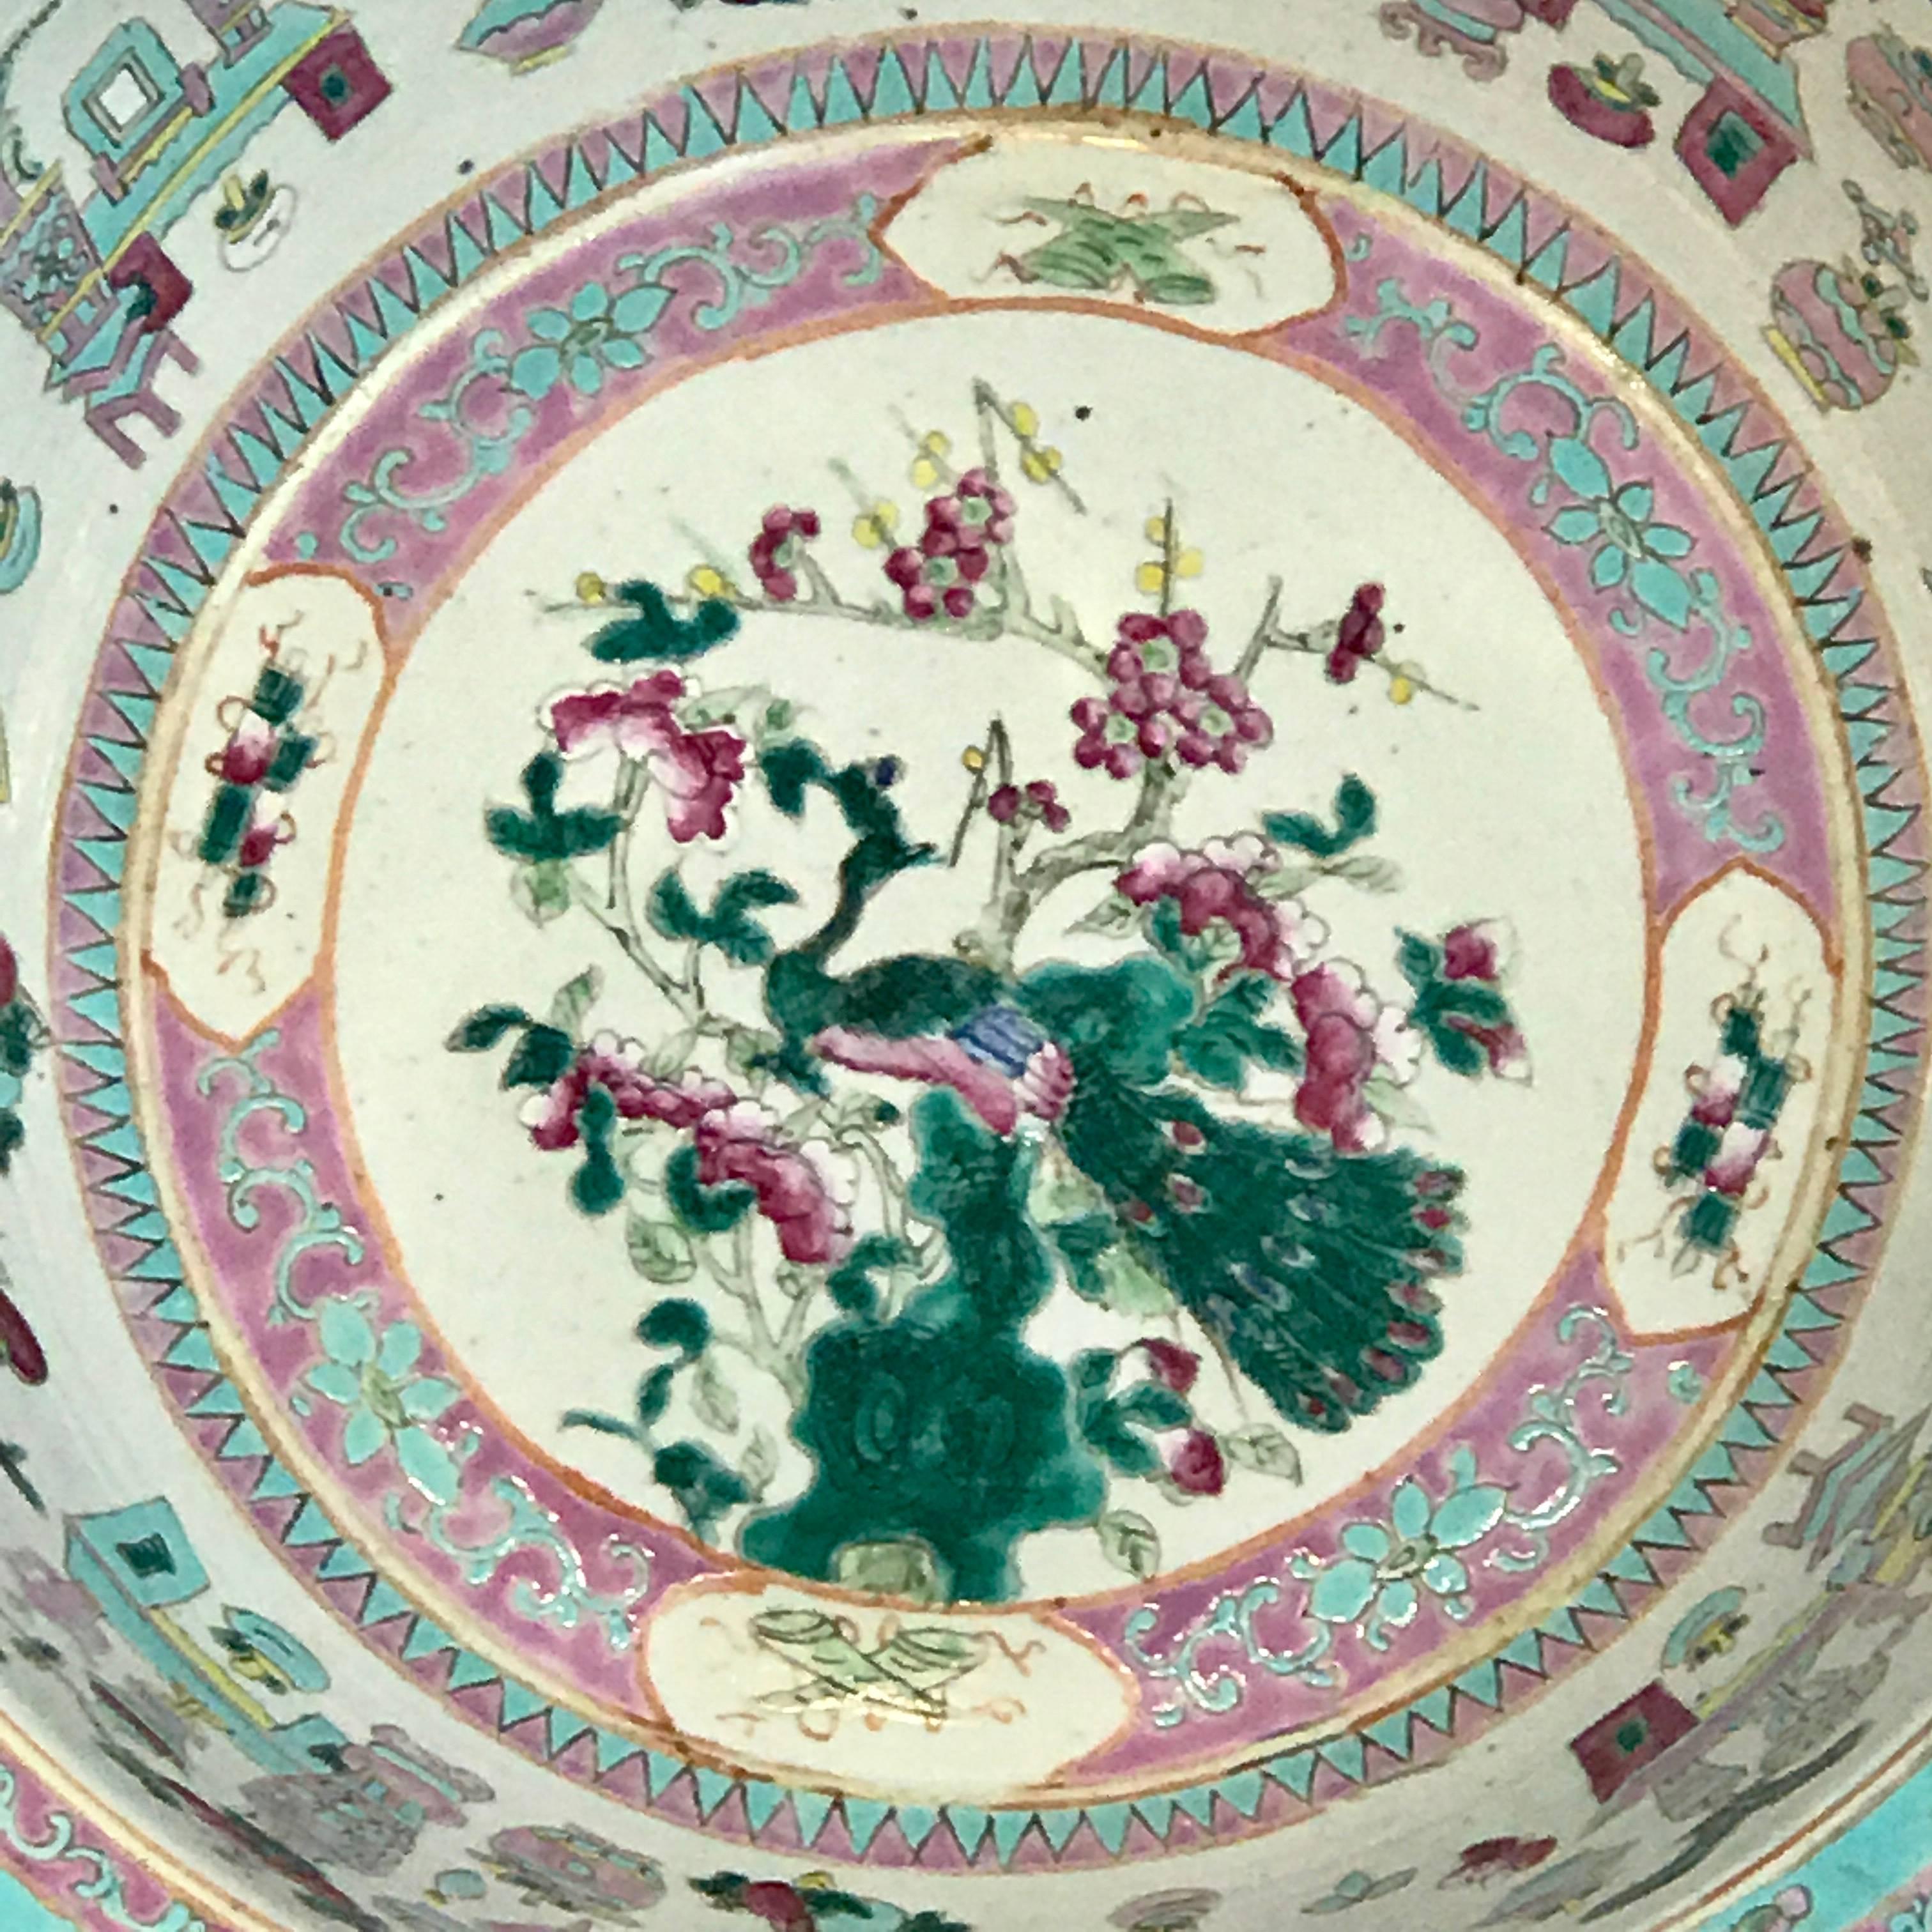 Large Qing dynasty Famille Verte peacock and vase motif bowl, beautifully decorated with 13